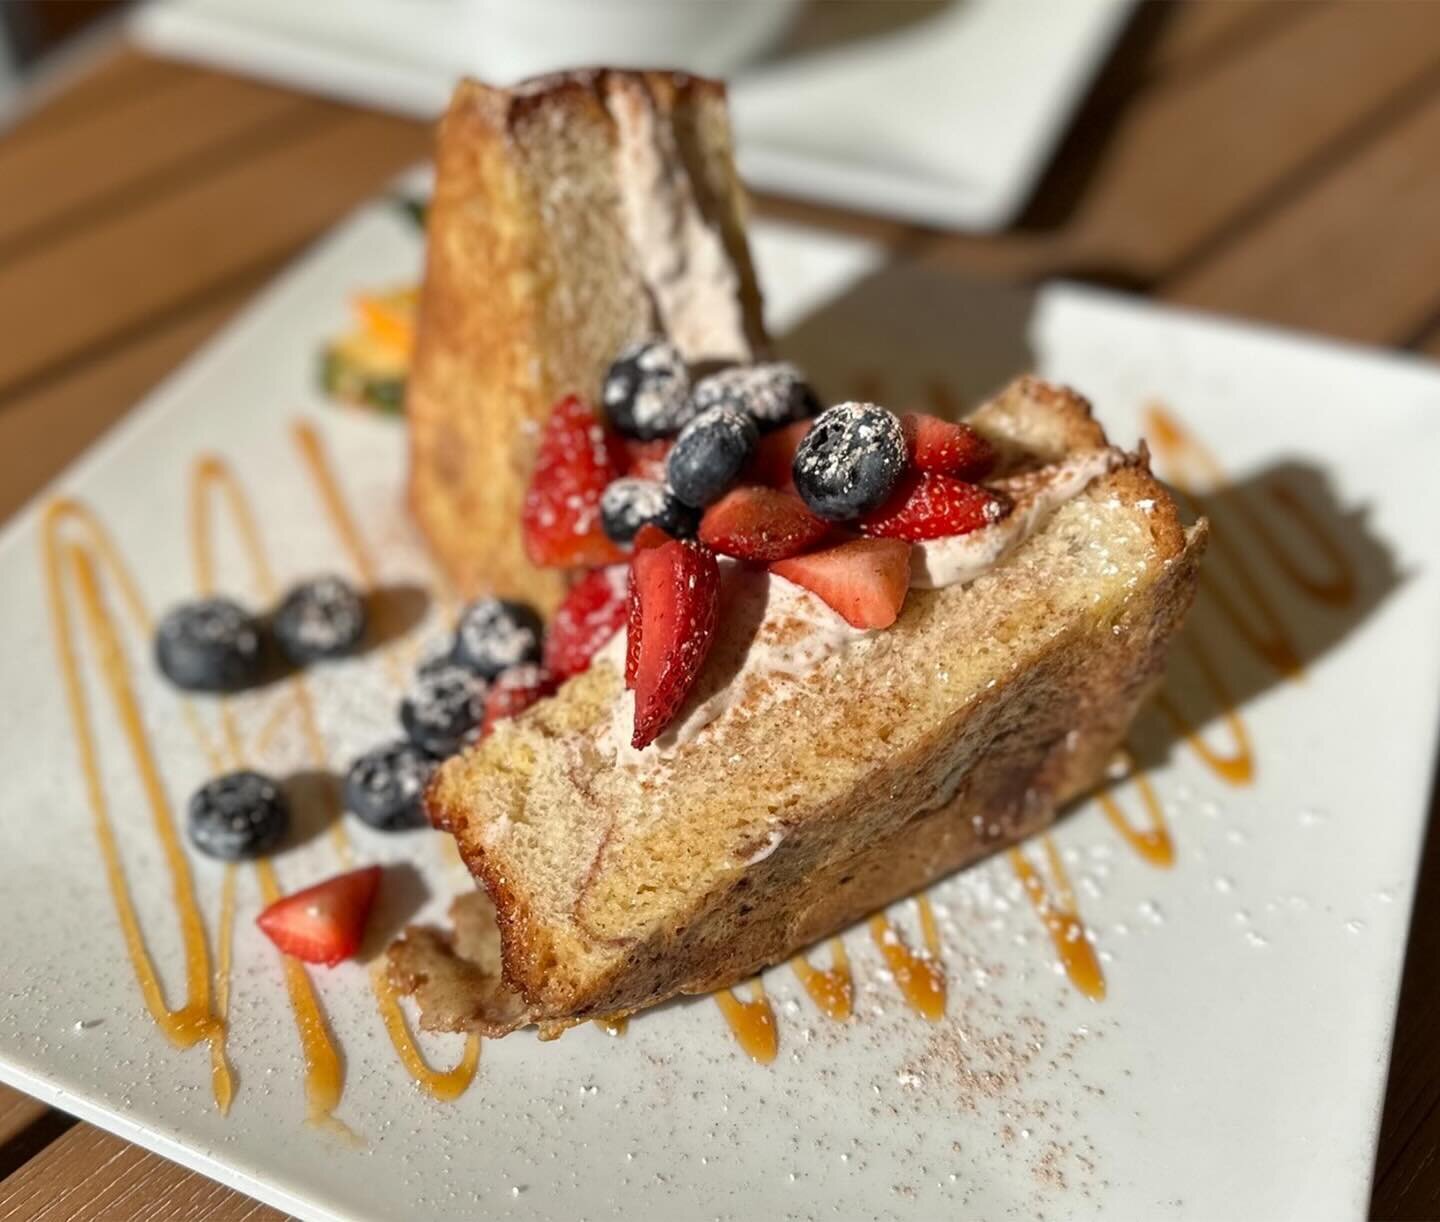 Hooray - Belle&rsquo;s Newport re-opens tomorrow, Weds., March 6, for the 2024 season! Come enjoy our favorites (Eggs Benedict, Twin Lobster Rolls, our Shipyard sandwich and more!) Plus this week&rsquo;s specials are Stuffed French Toast, Eggs Benedi